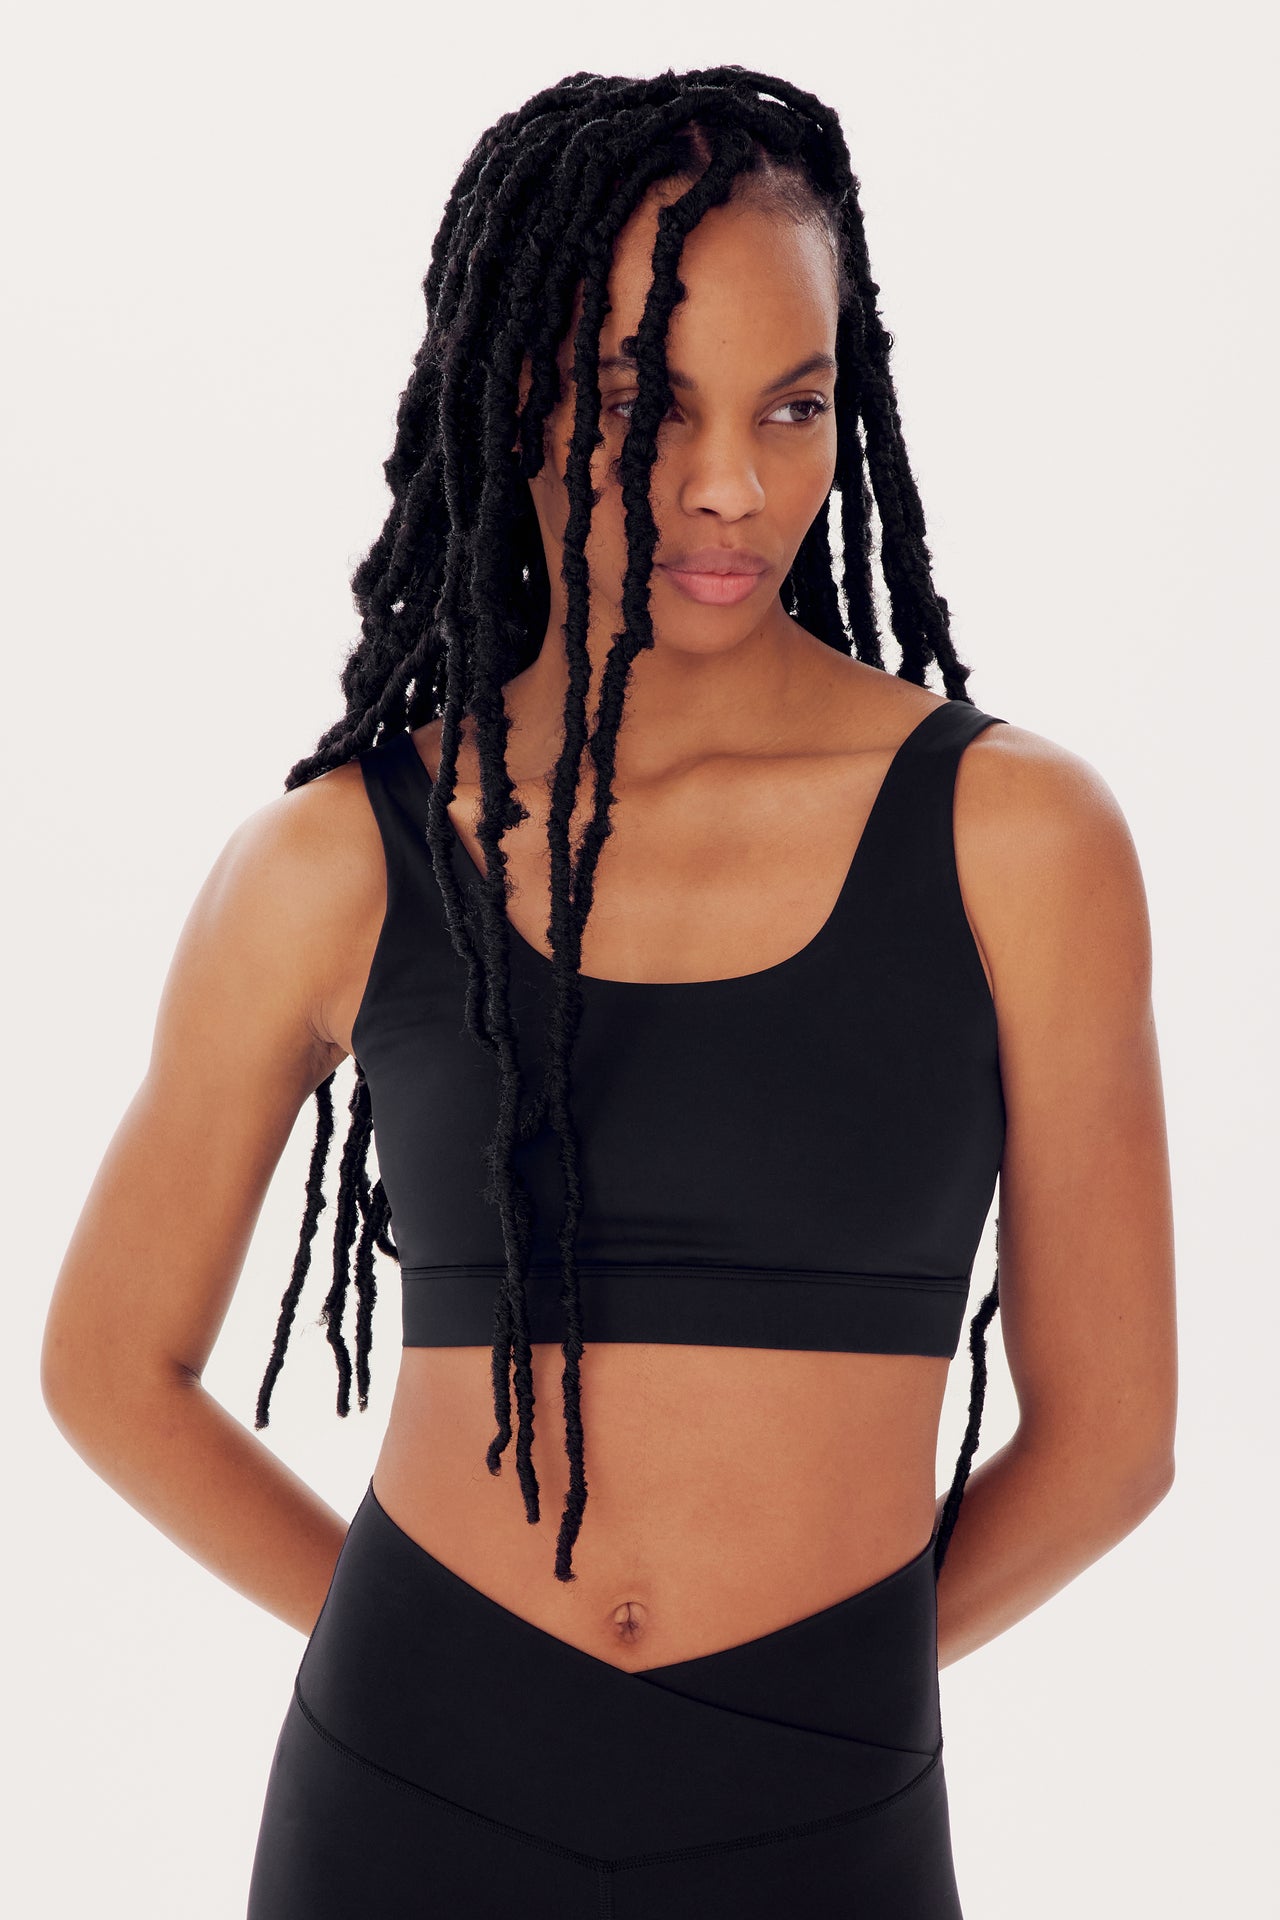 A woman with long braids wearing a SPLITS59 Sprint Rigor Bra in Black and leggings, standing against a white background, looking to the side.